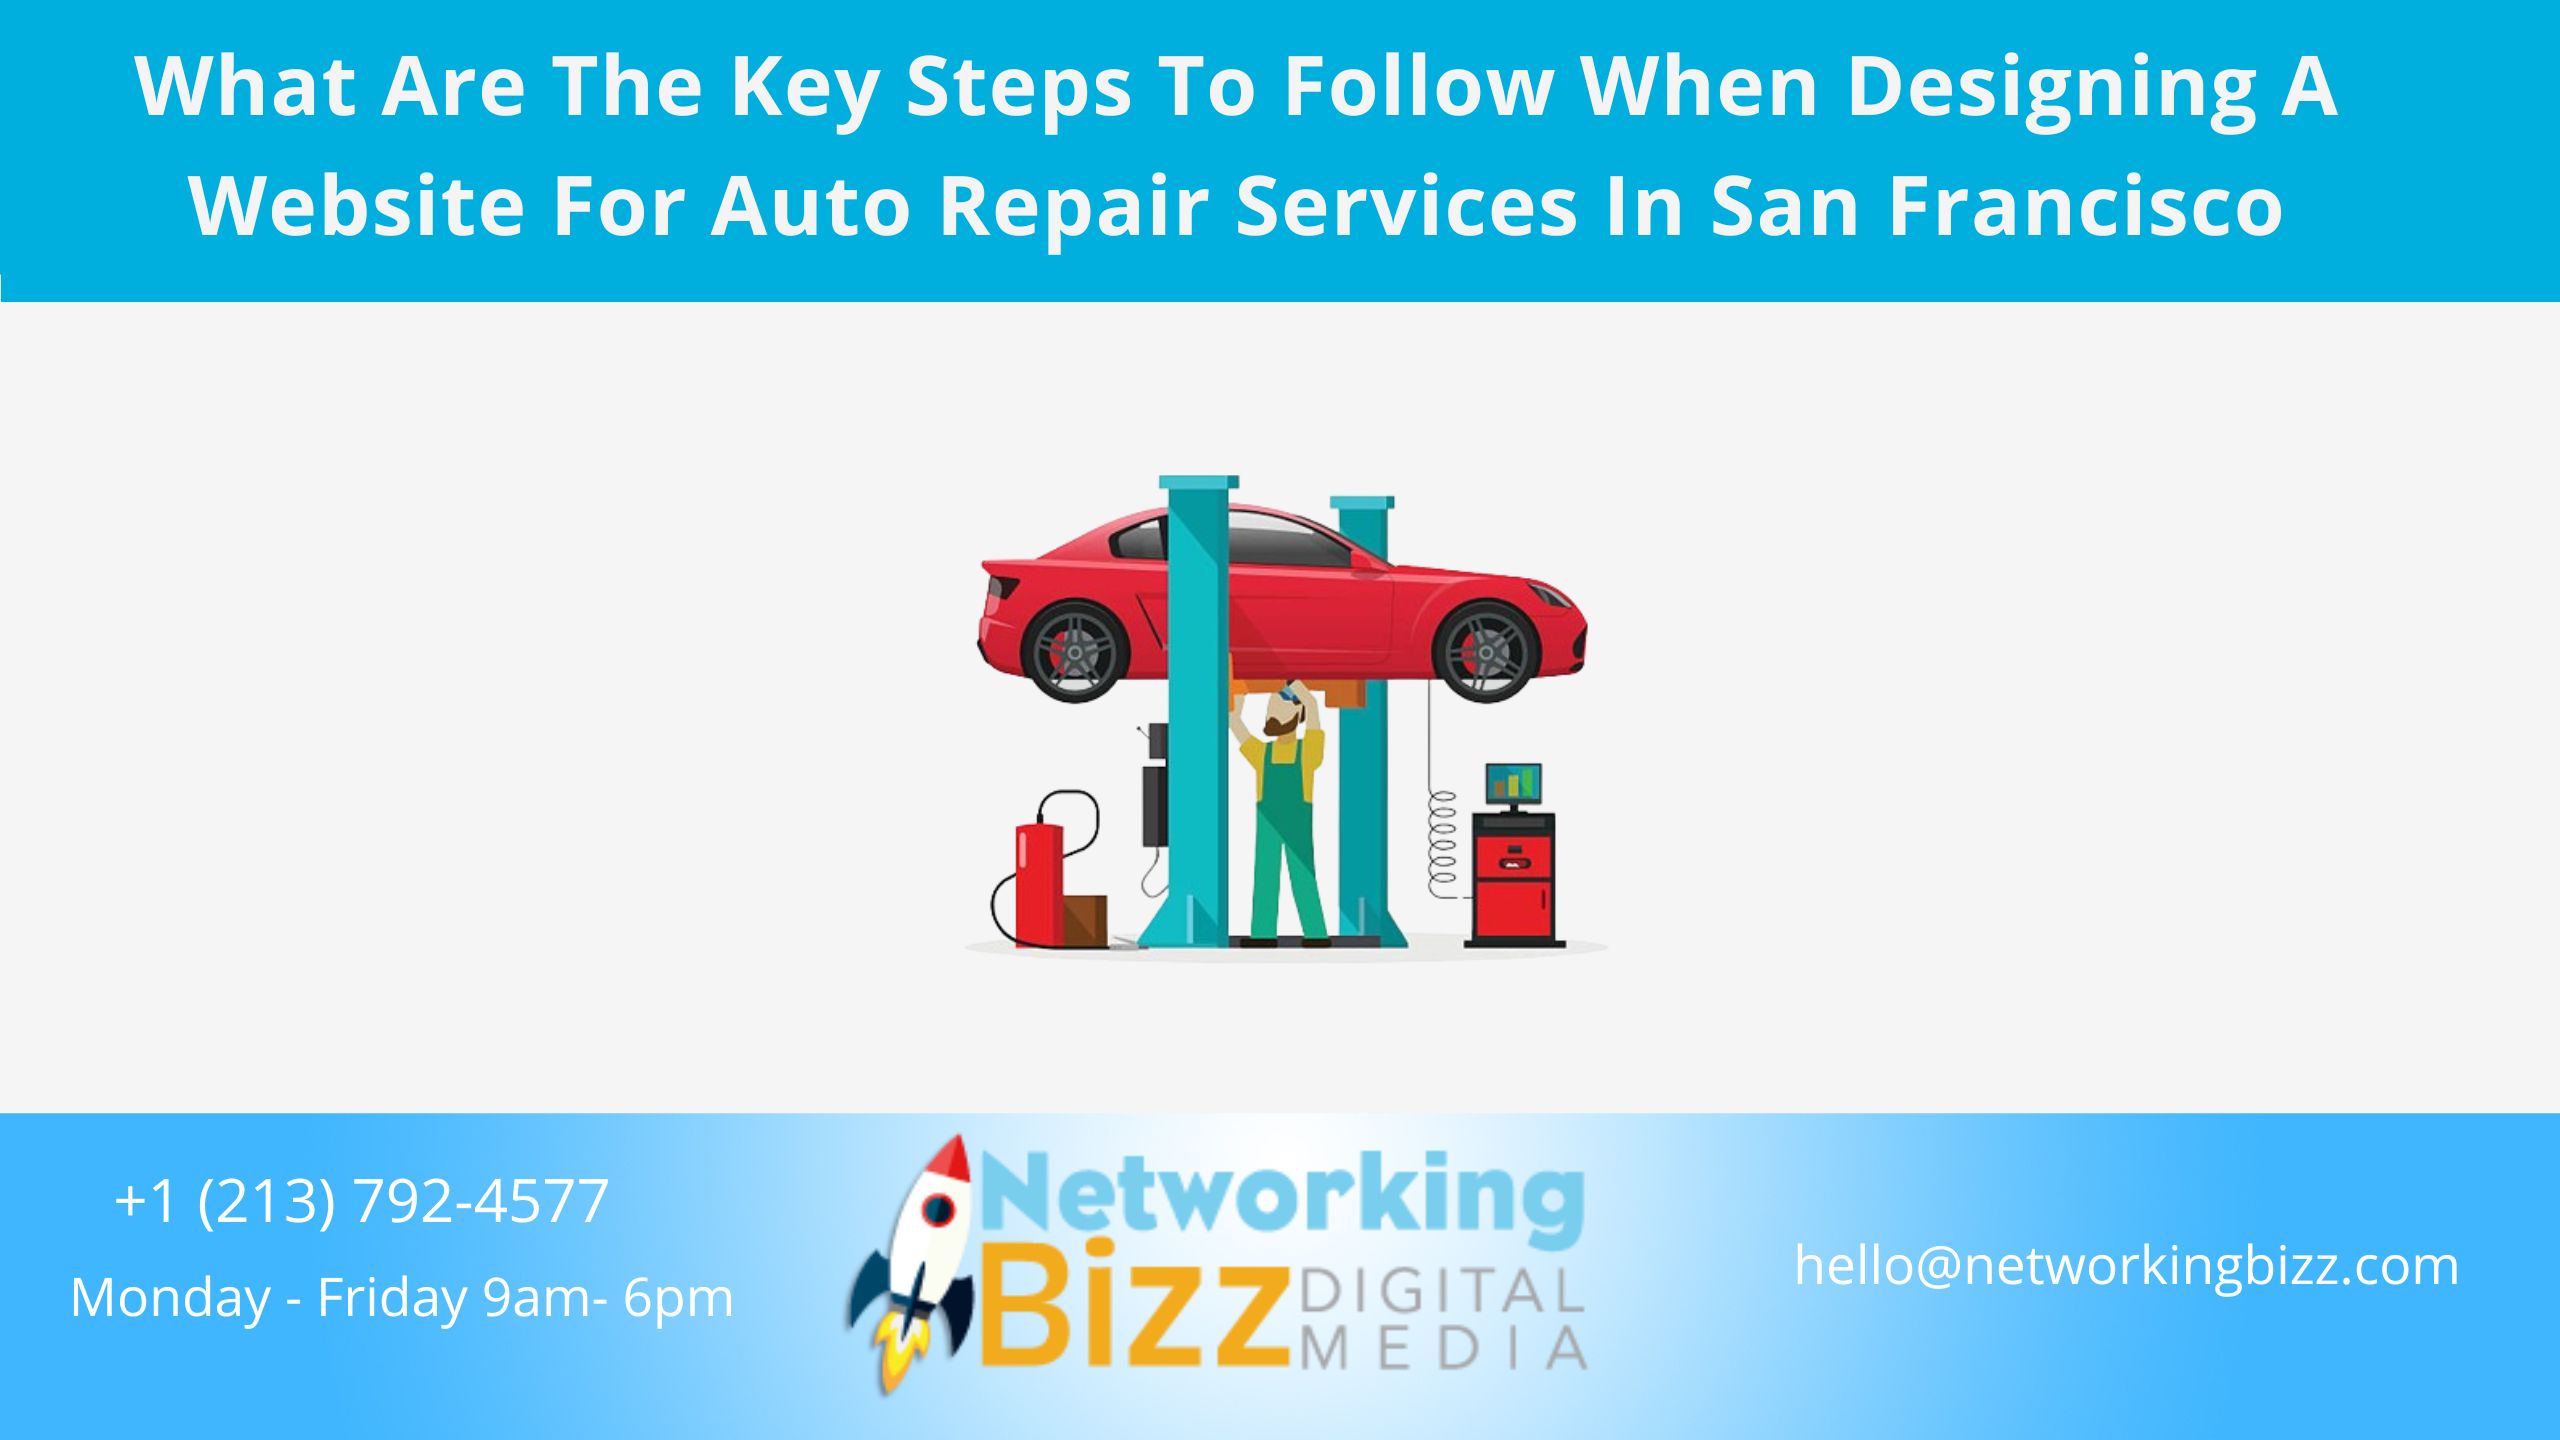 What Are The Key Steps To Follow When Designing A Website For Auto Repair Services In San Francisco